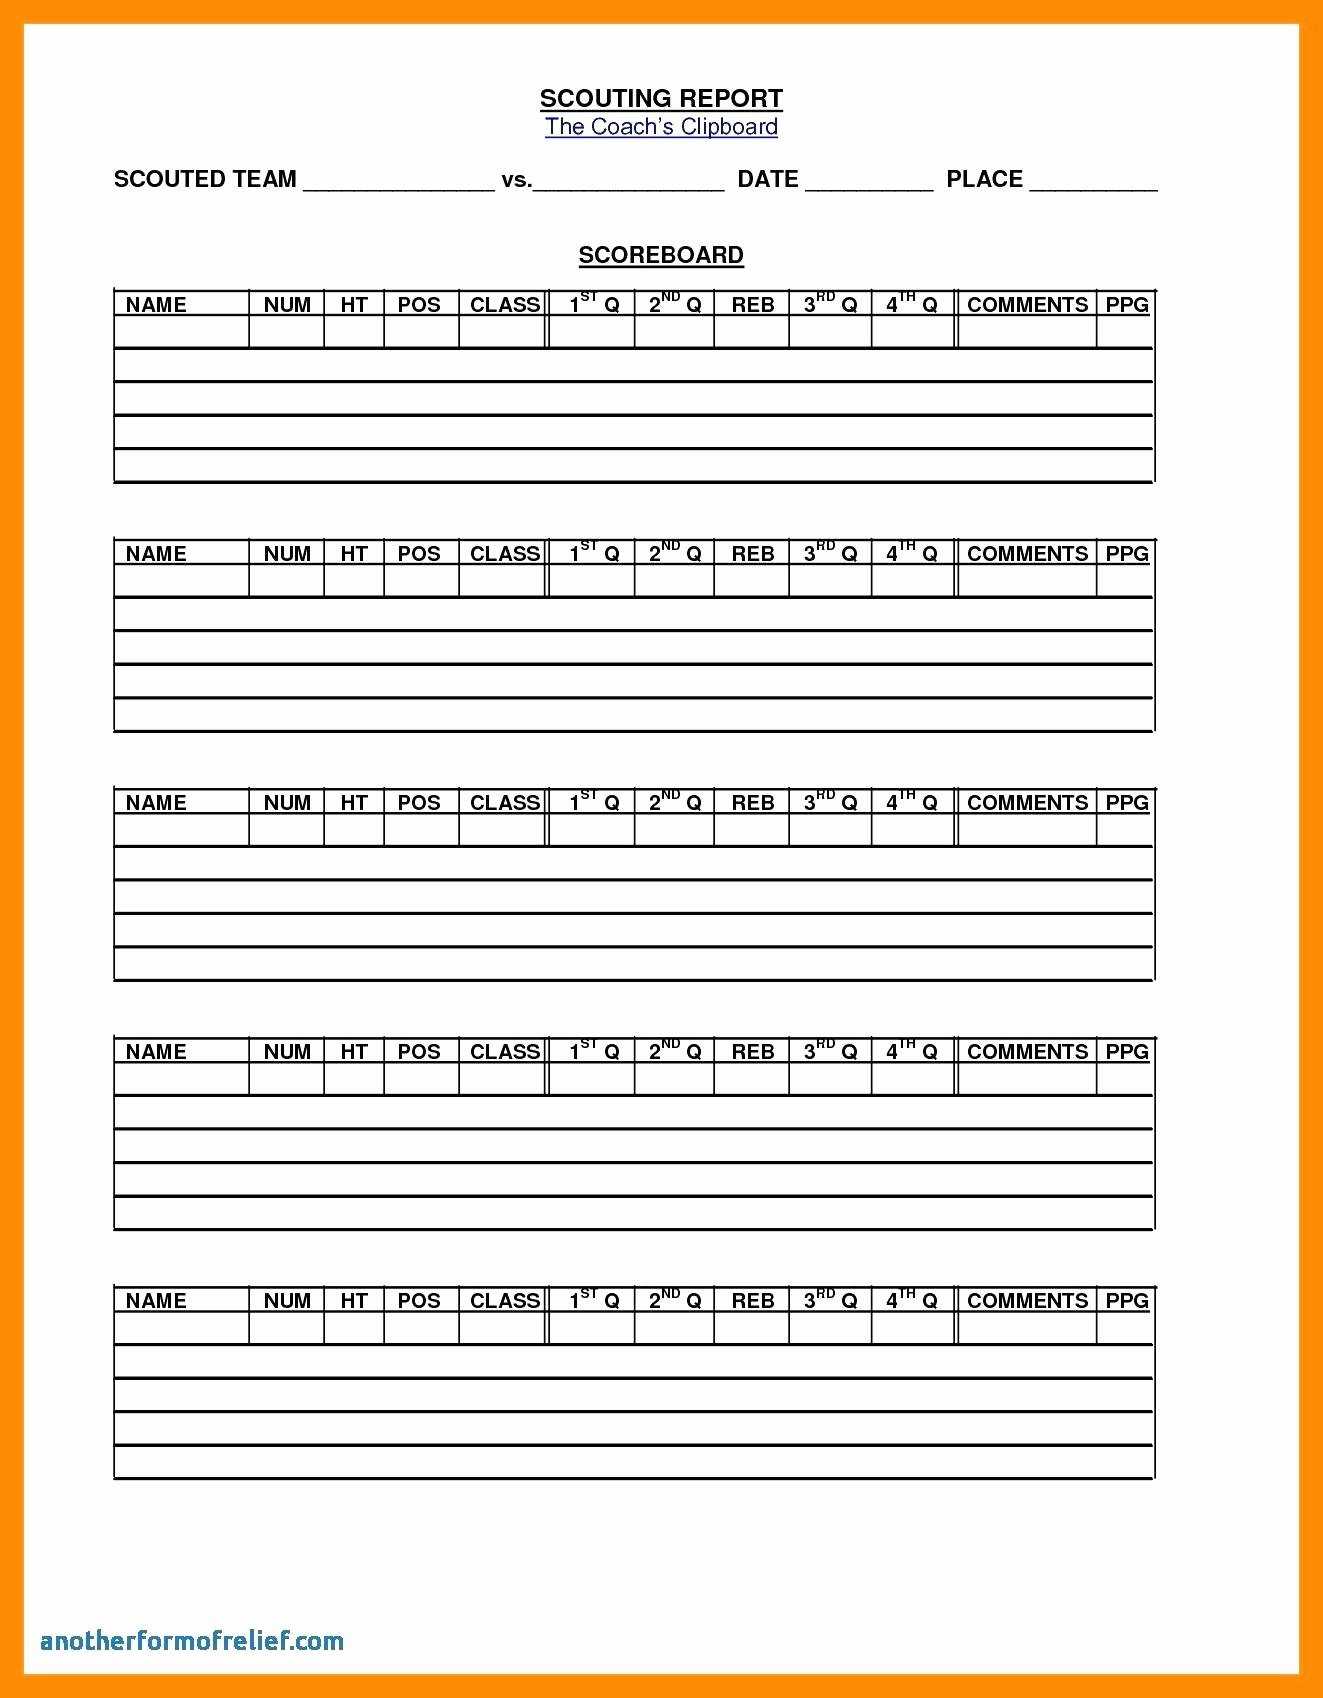 Free Baseball Stats Spreadsheet Excel Stat Sheet Blank Inside Scouting Report Template Basketball